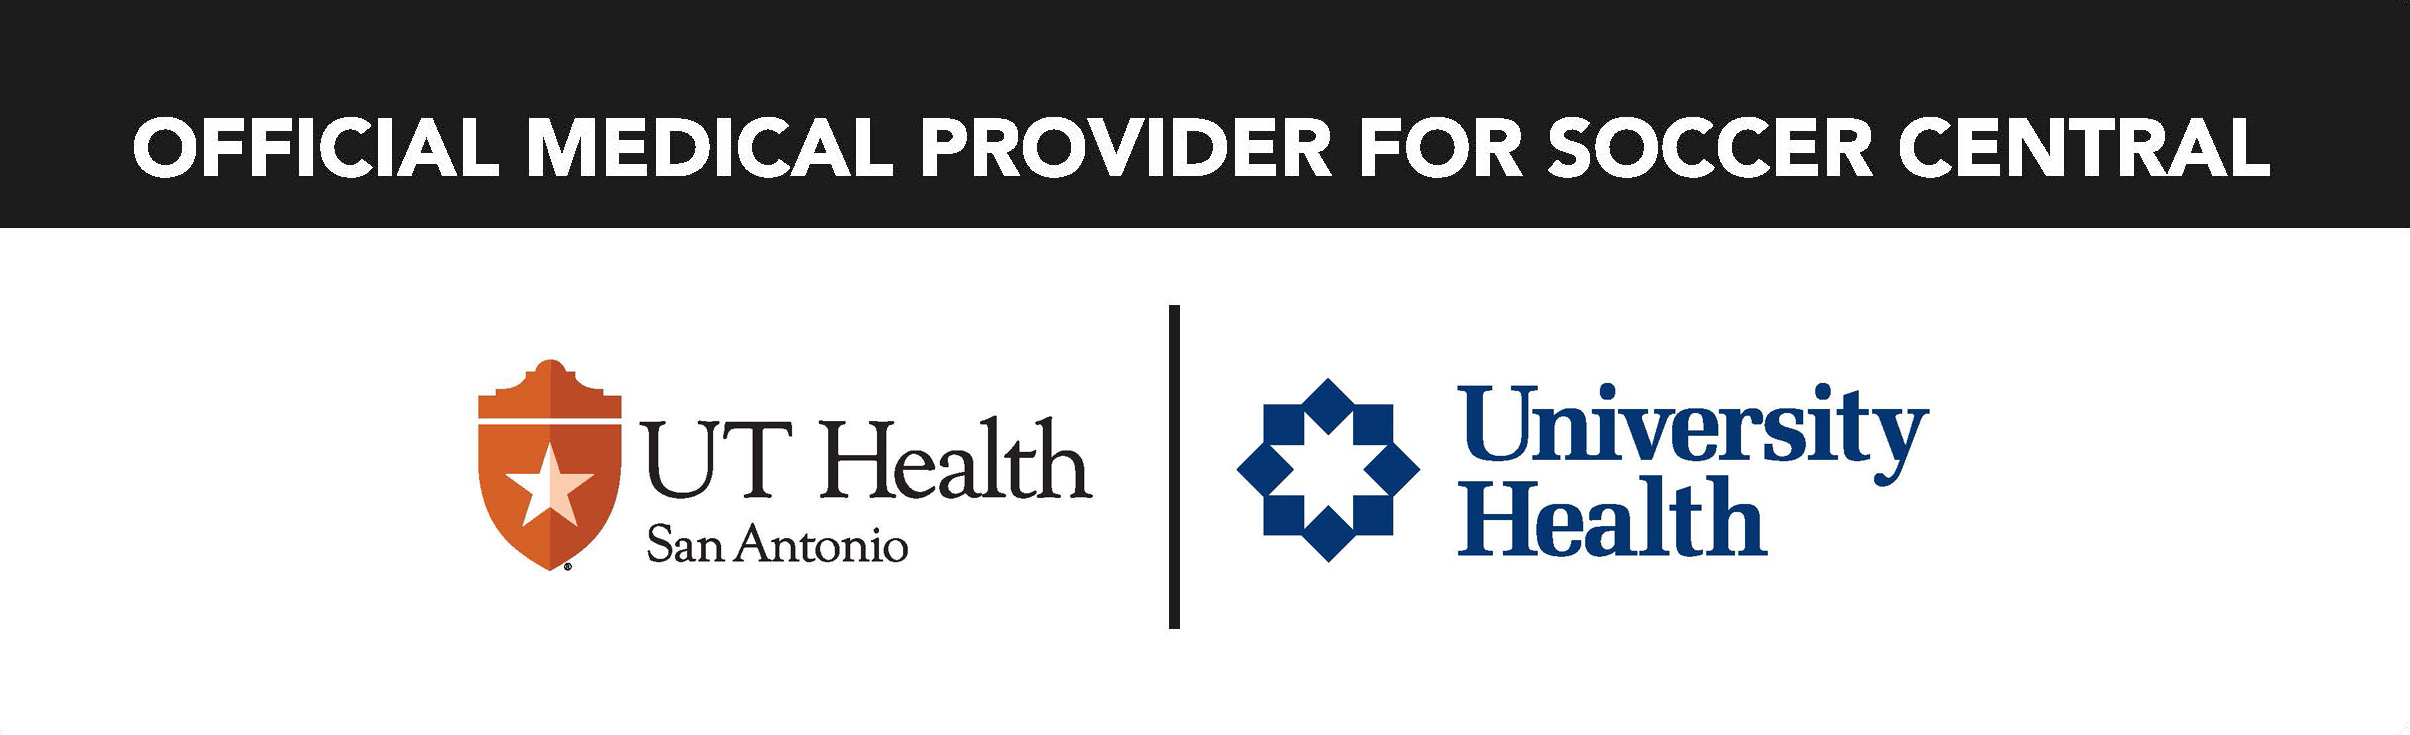 A graphic with the UT Health San Antonio and University Health logos that says "Official Medical Provider for Soccer Central."